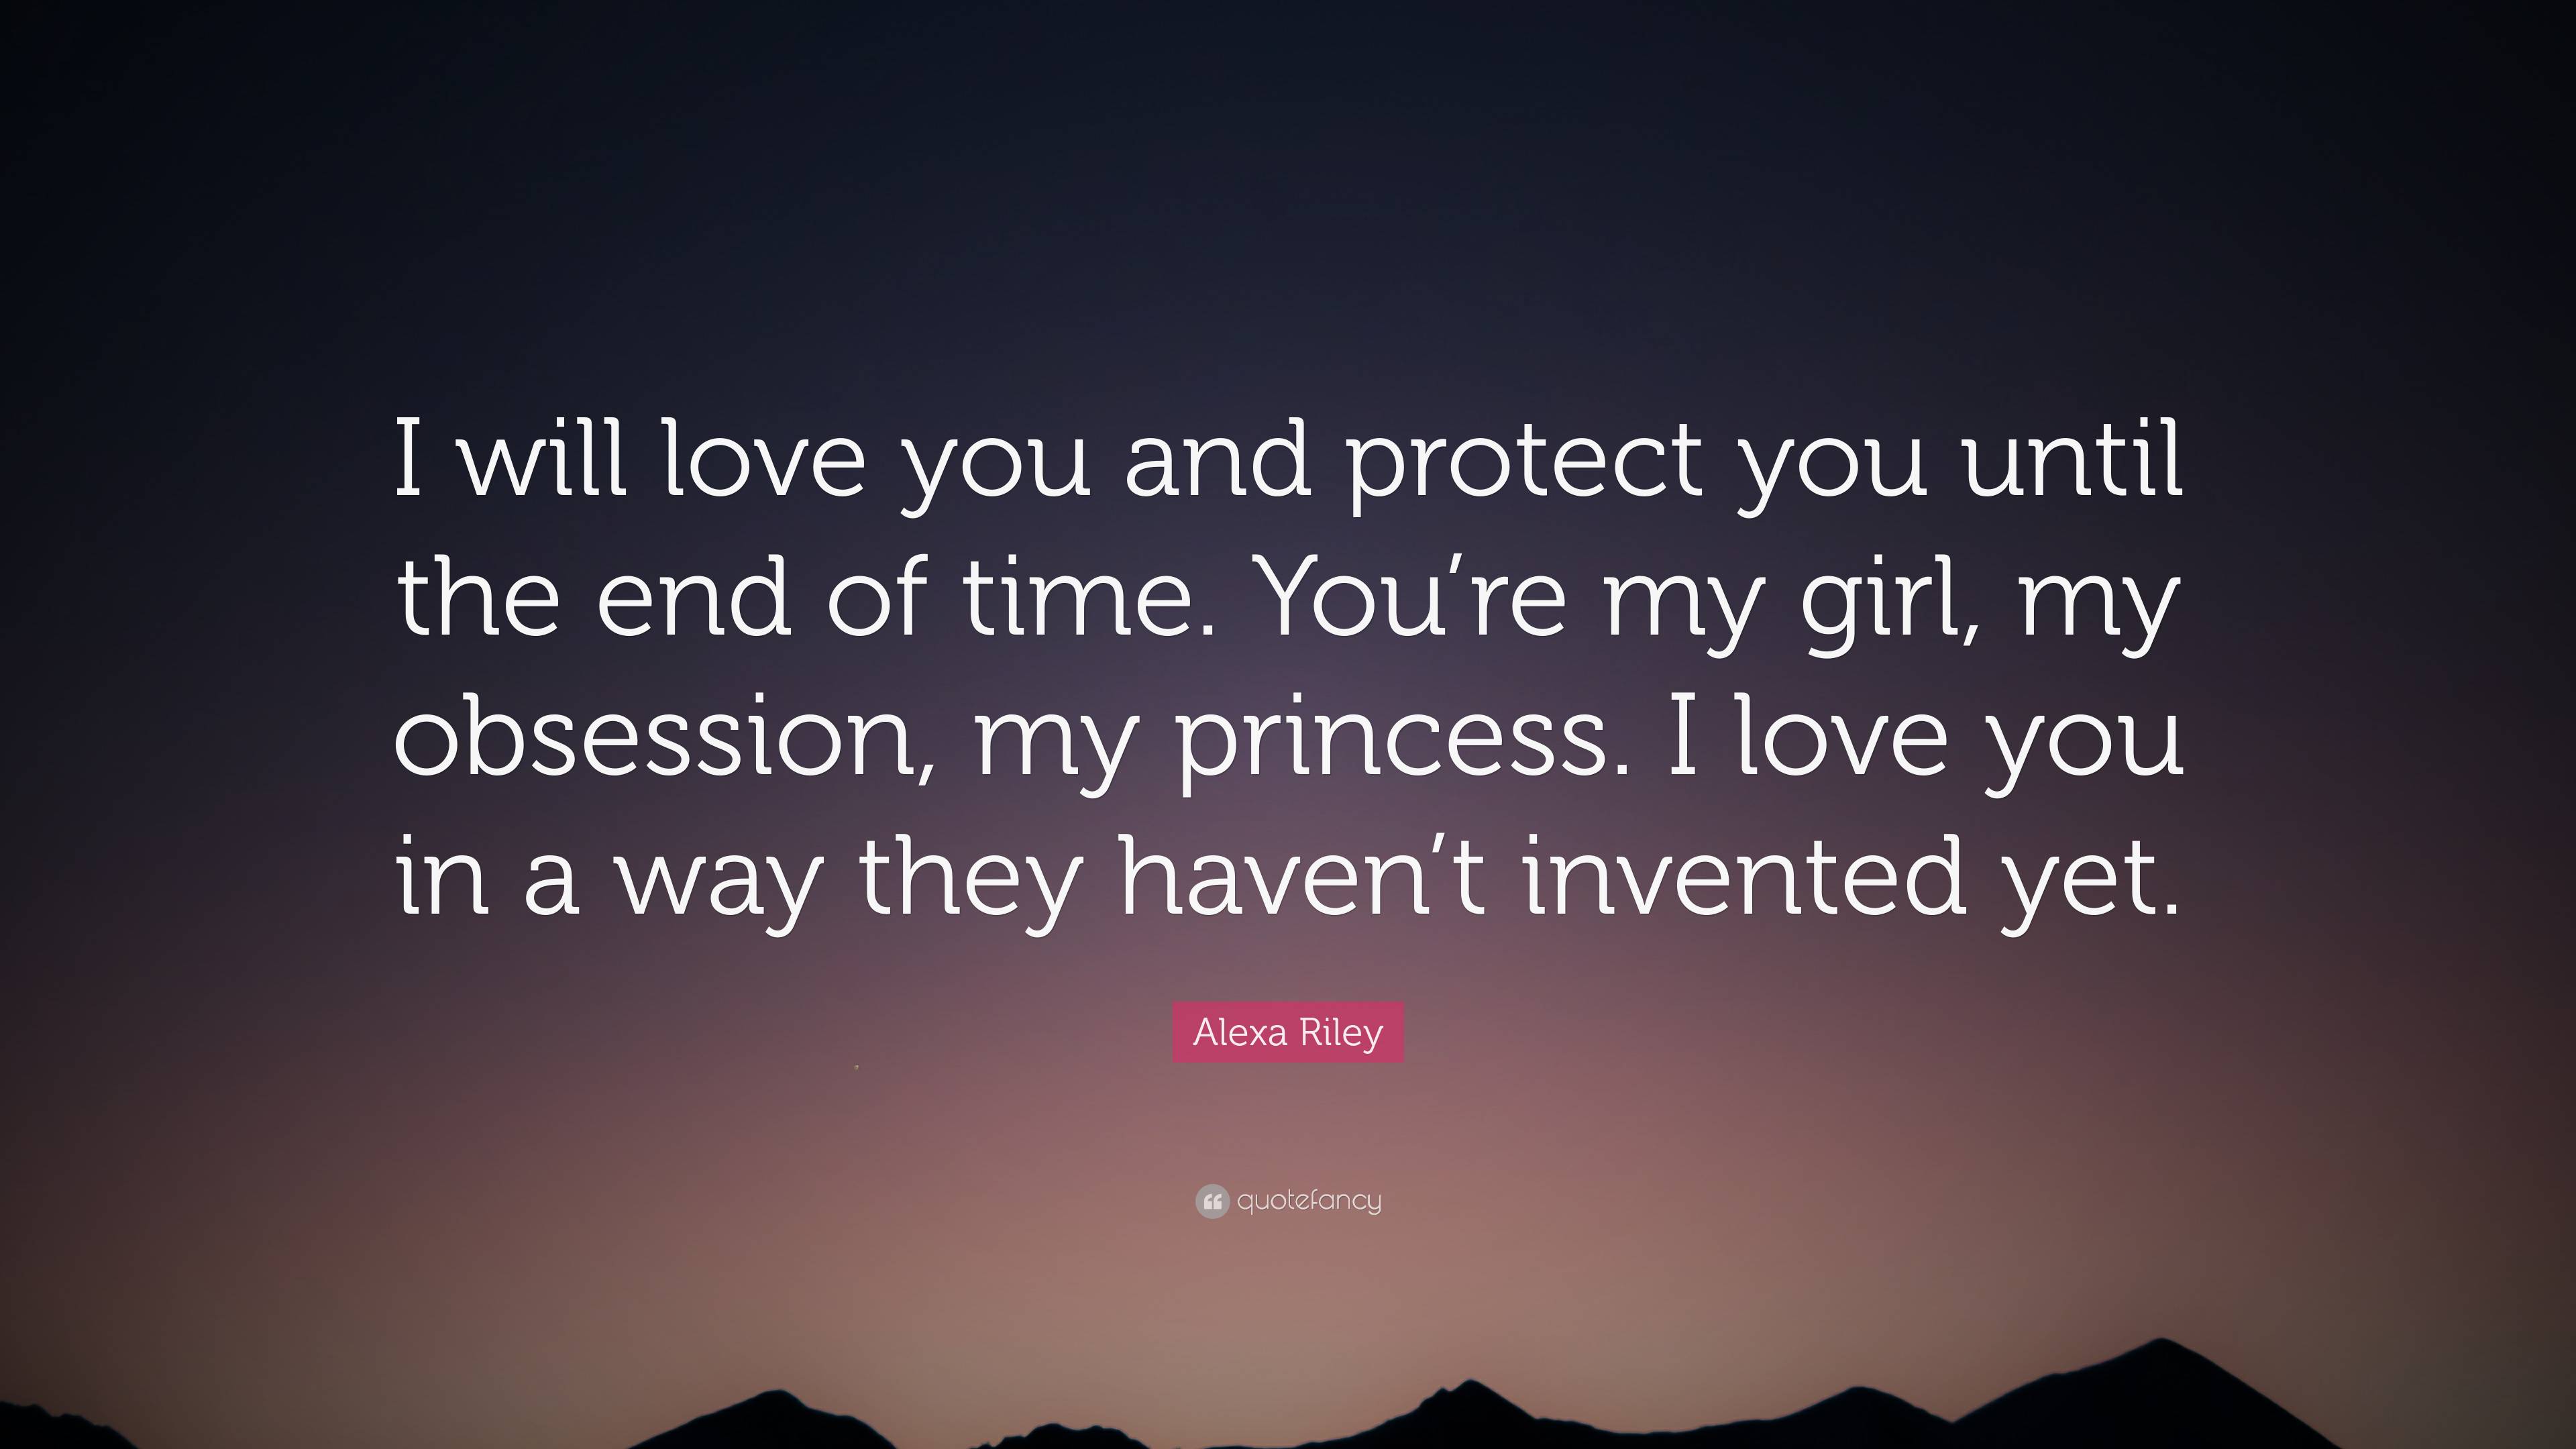 I Love You Until The End Alexa Riley Quote: “I will love you and protect you until the end of time.  You're my girl, my obsession, my princess. I love you in a way th...”